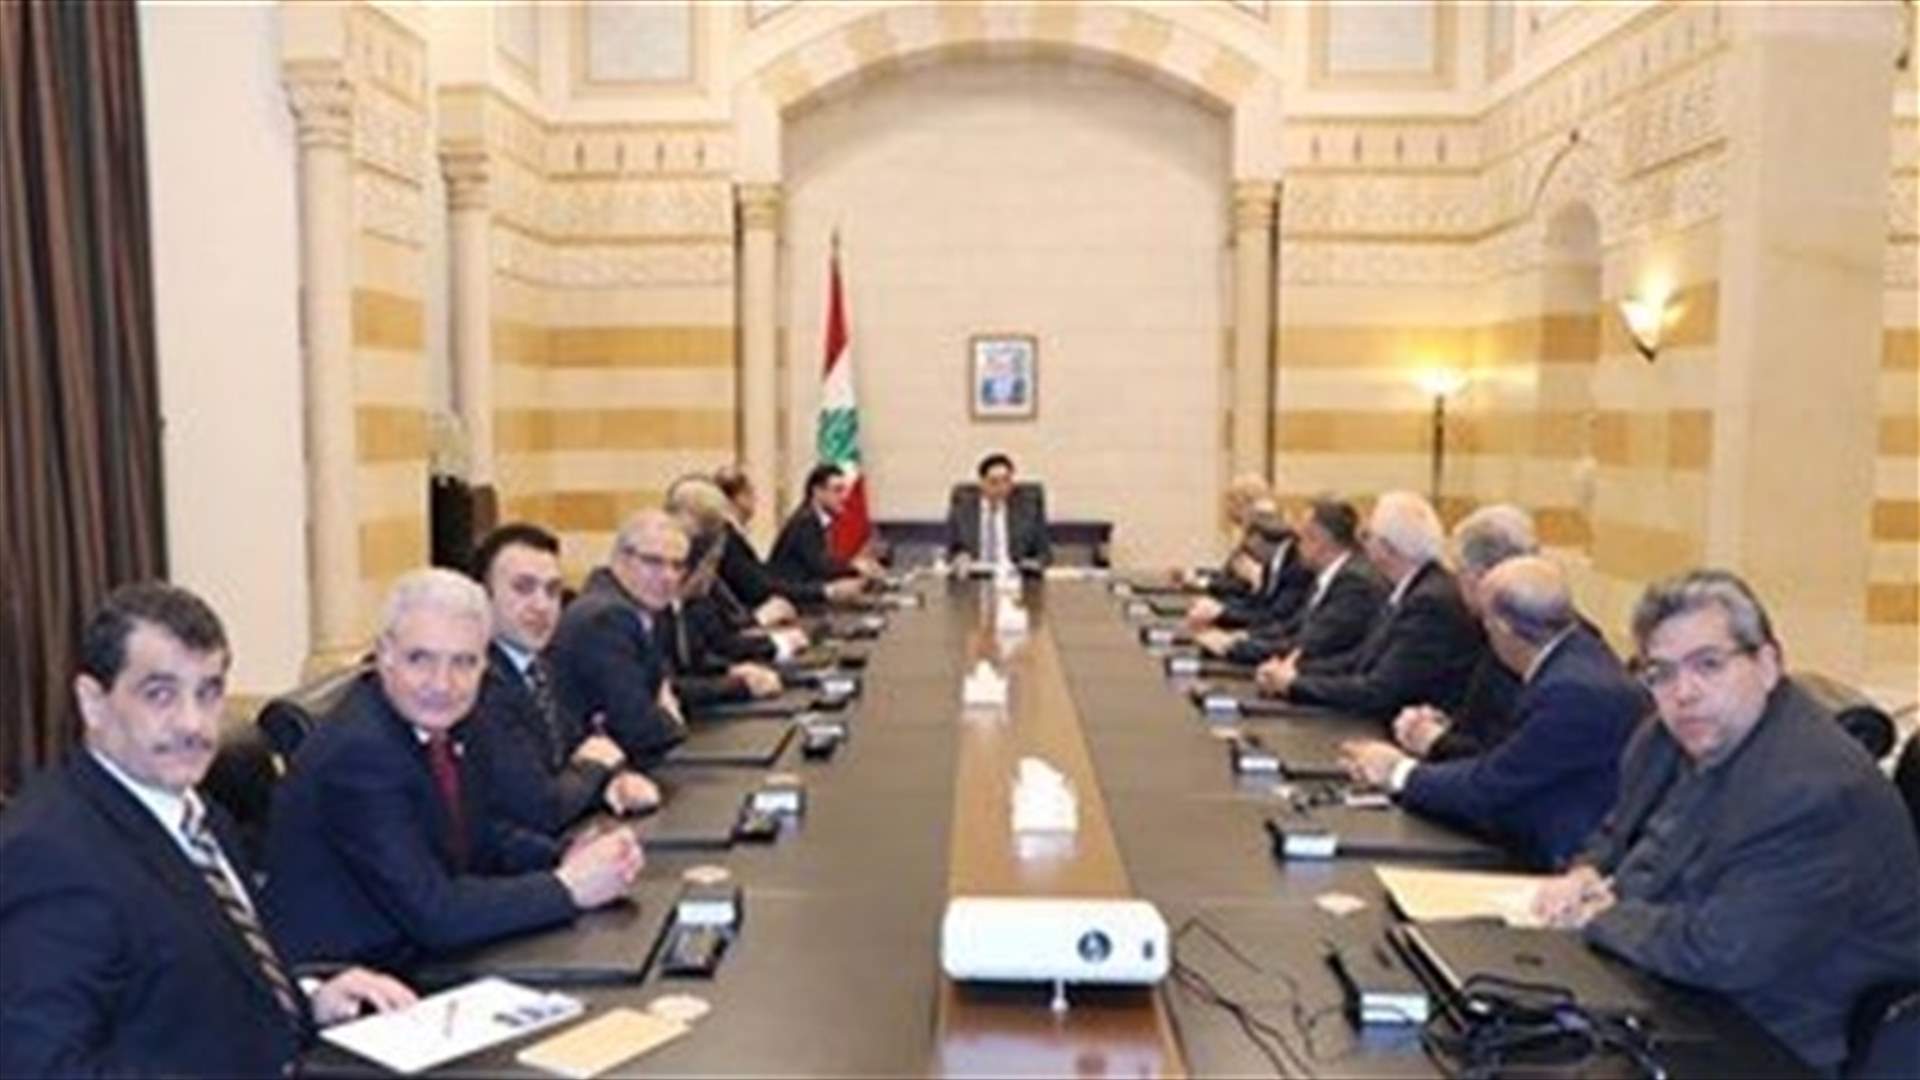 PM Diab: Lebanon is facing multiple crisis inherited from previously adopted policies